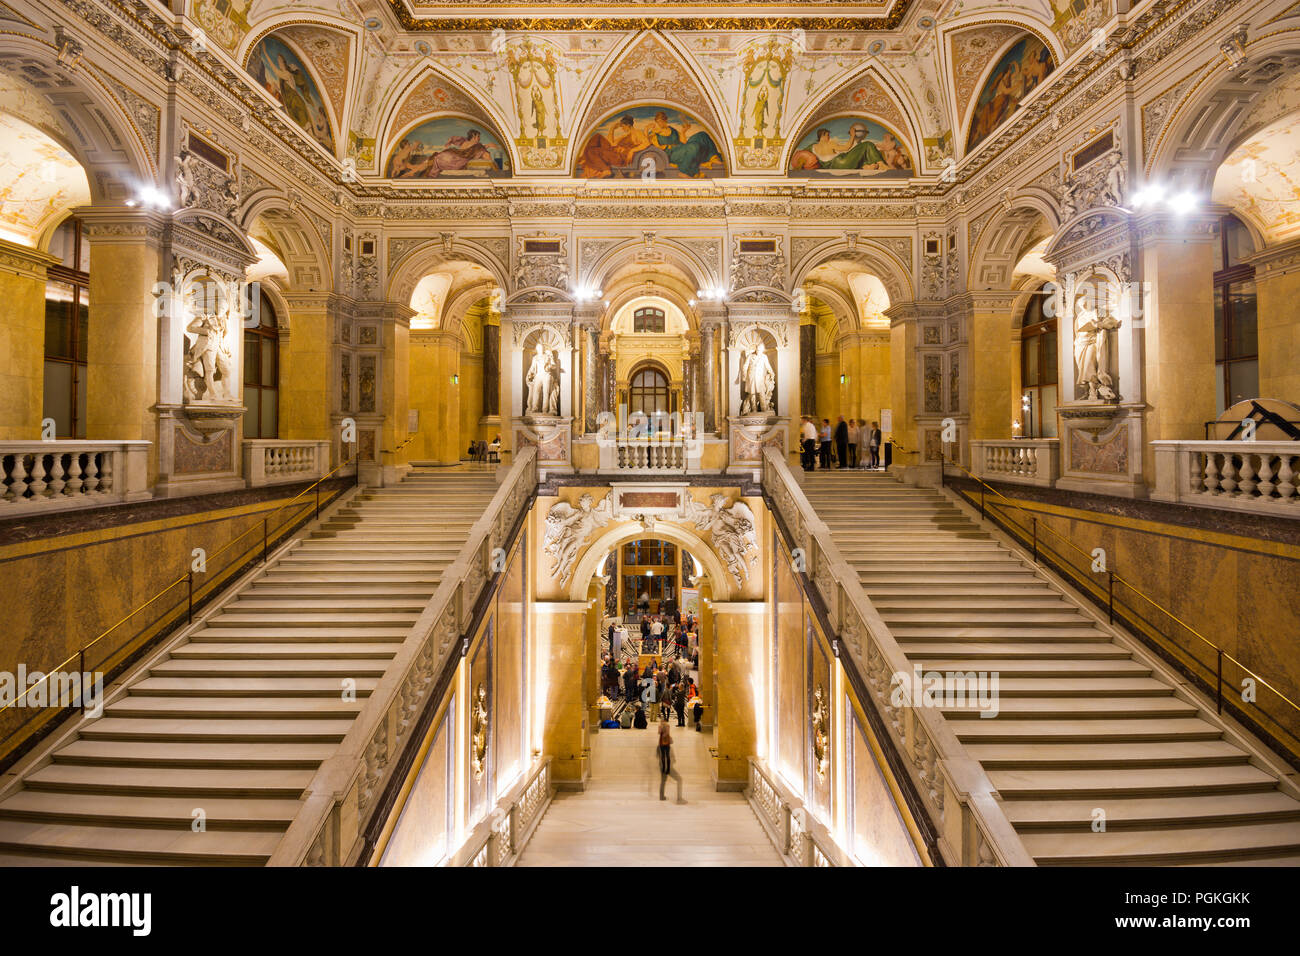 Sumptuous staircase with statues and round arches in imposing interior of famous Naturhistorisches Museum (natural history museum) in Vienna old town. Stock Photo